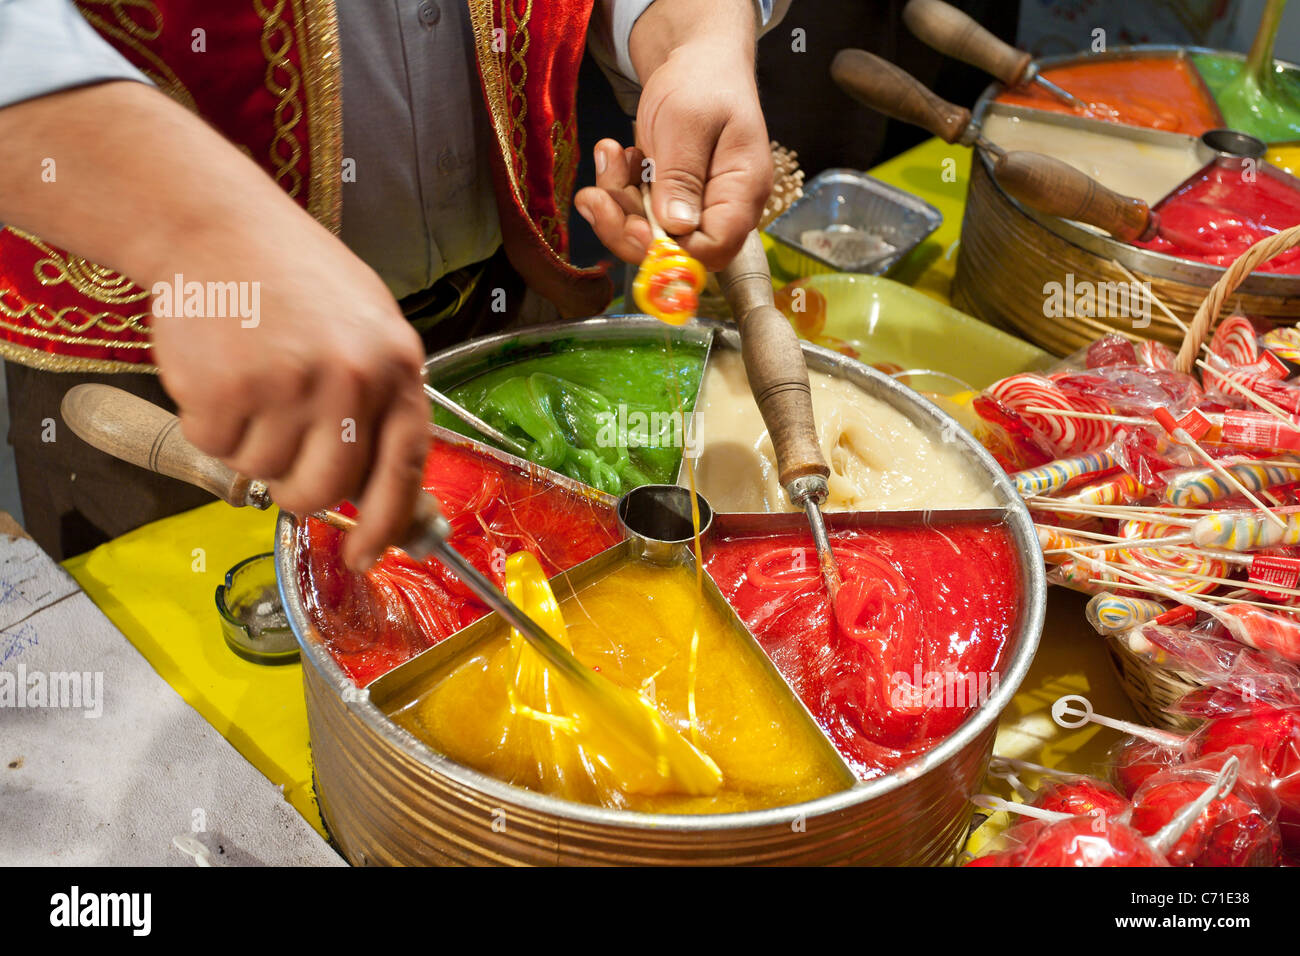 Candy making in the market. Hands move swiftly rolling the molten multicoloured candy into mouth watering suckers Stock Photo